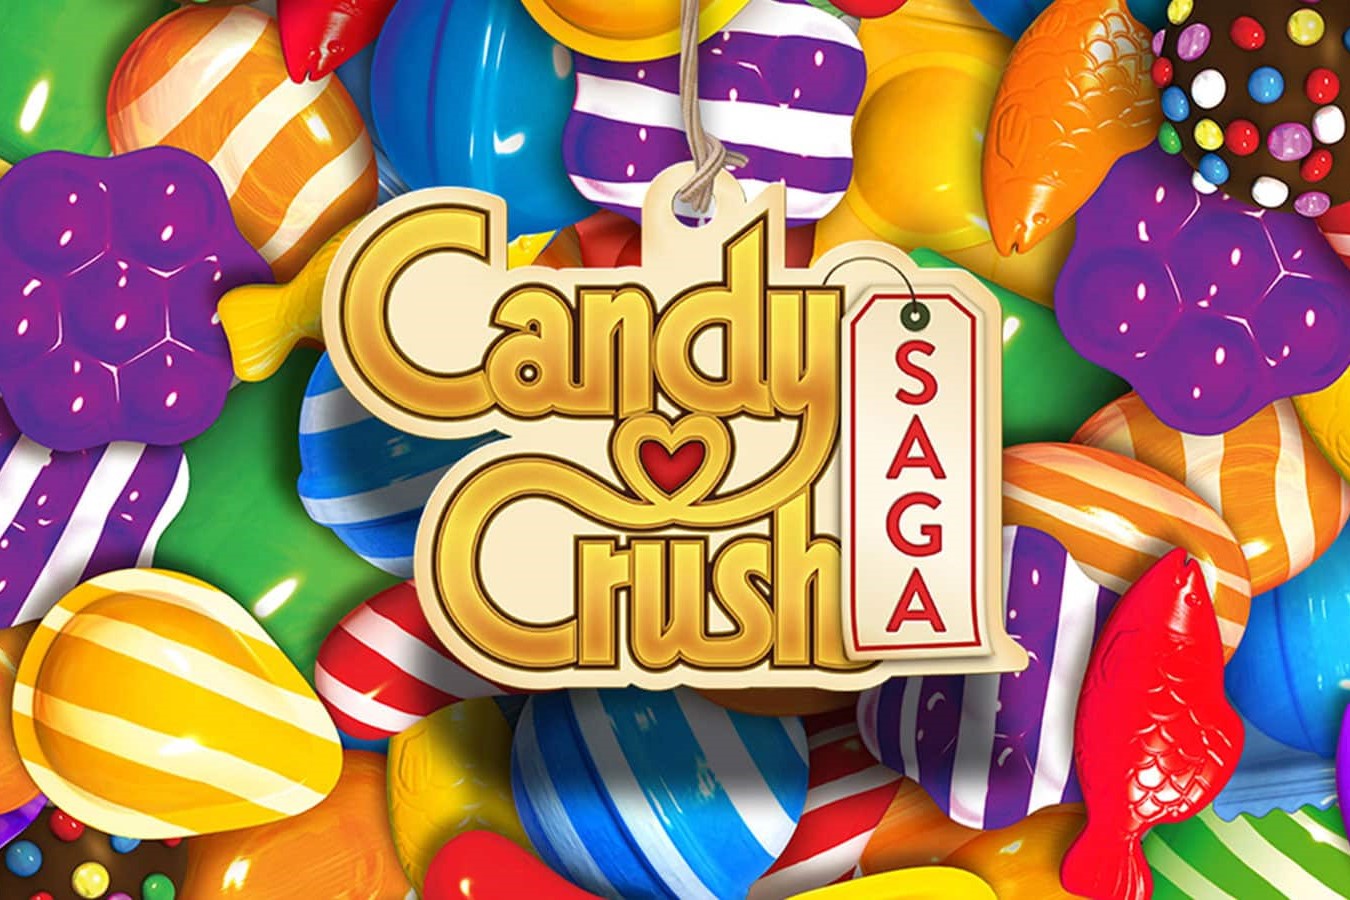 The Most Insanely Difficult Level In Candy Crush Saga!